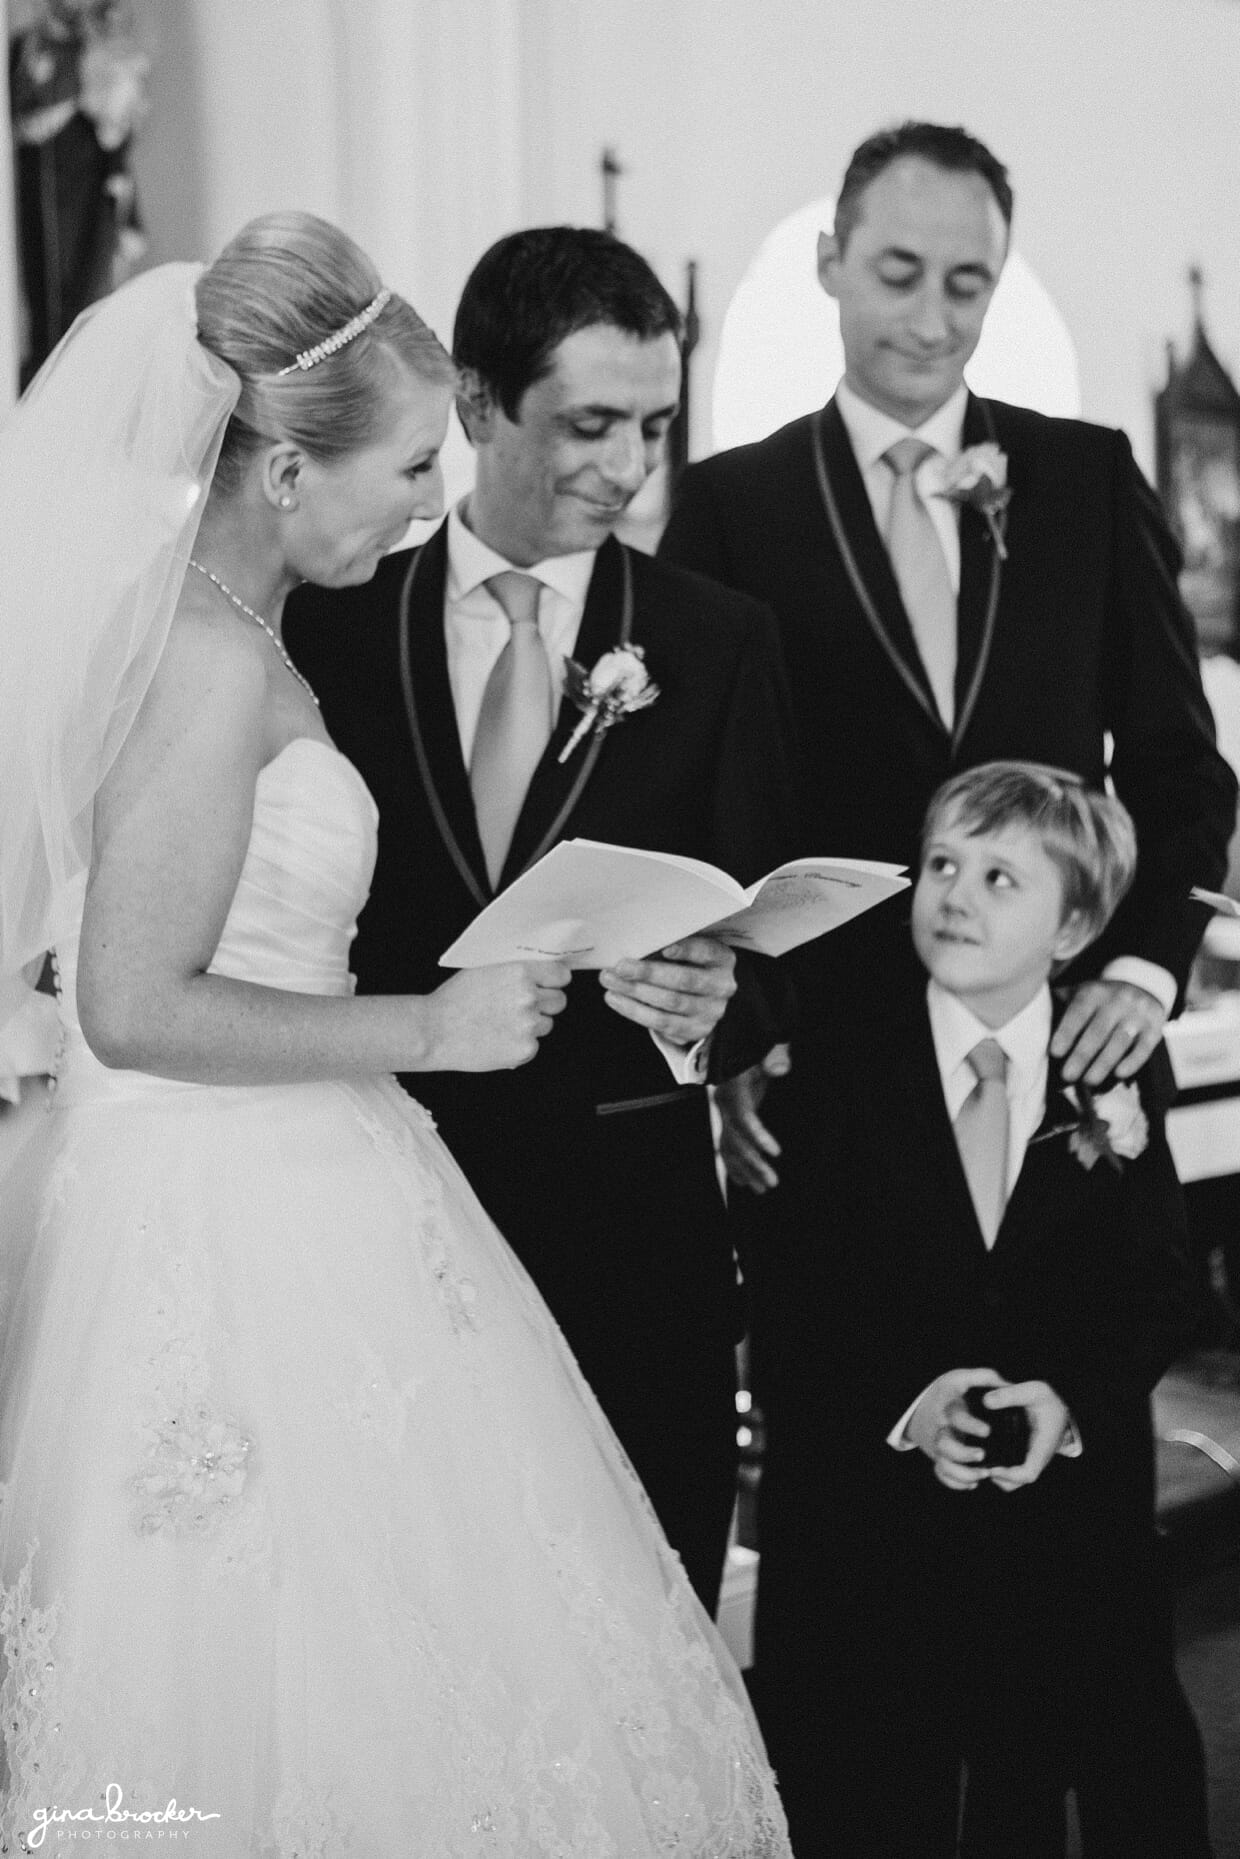 The ring bearer looks up at the bride and groom as they say their wedding vows during their small church wedding ceremony